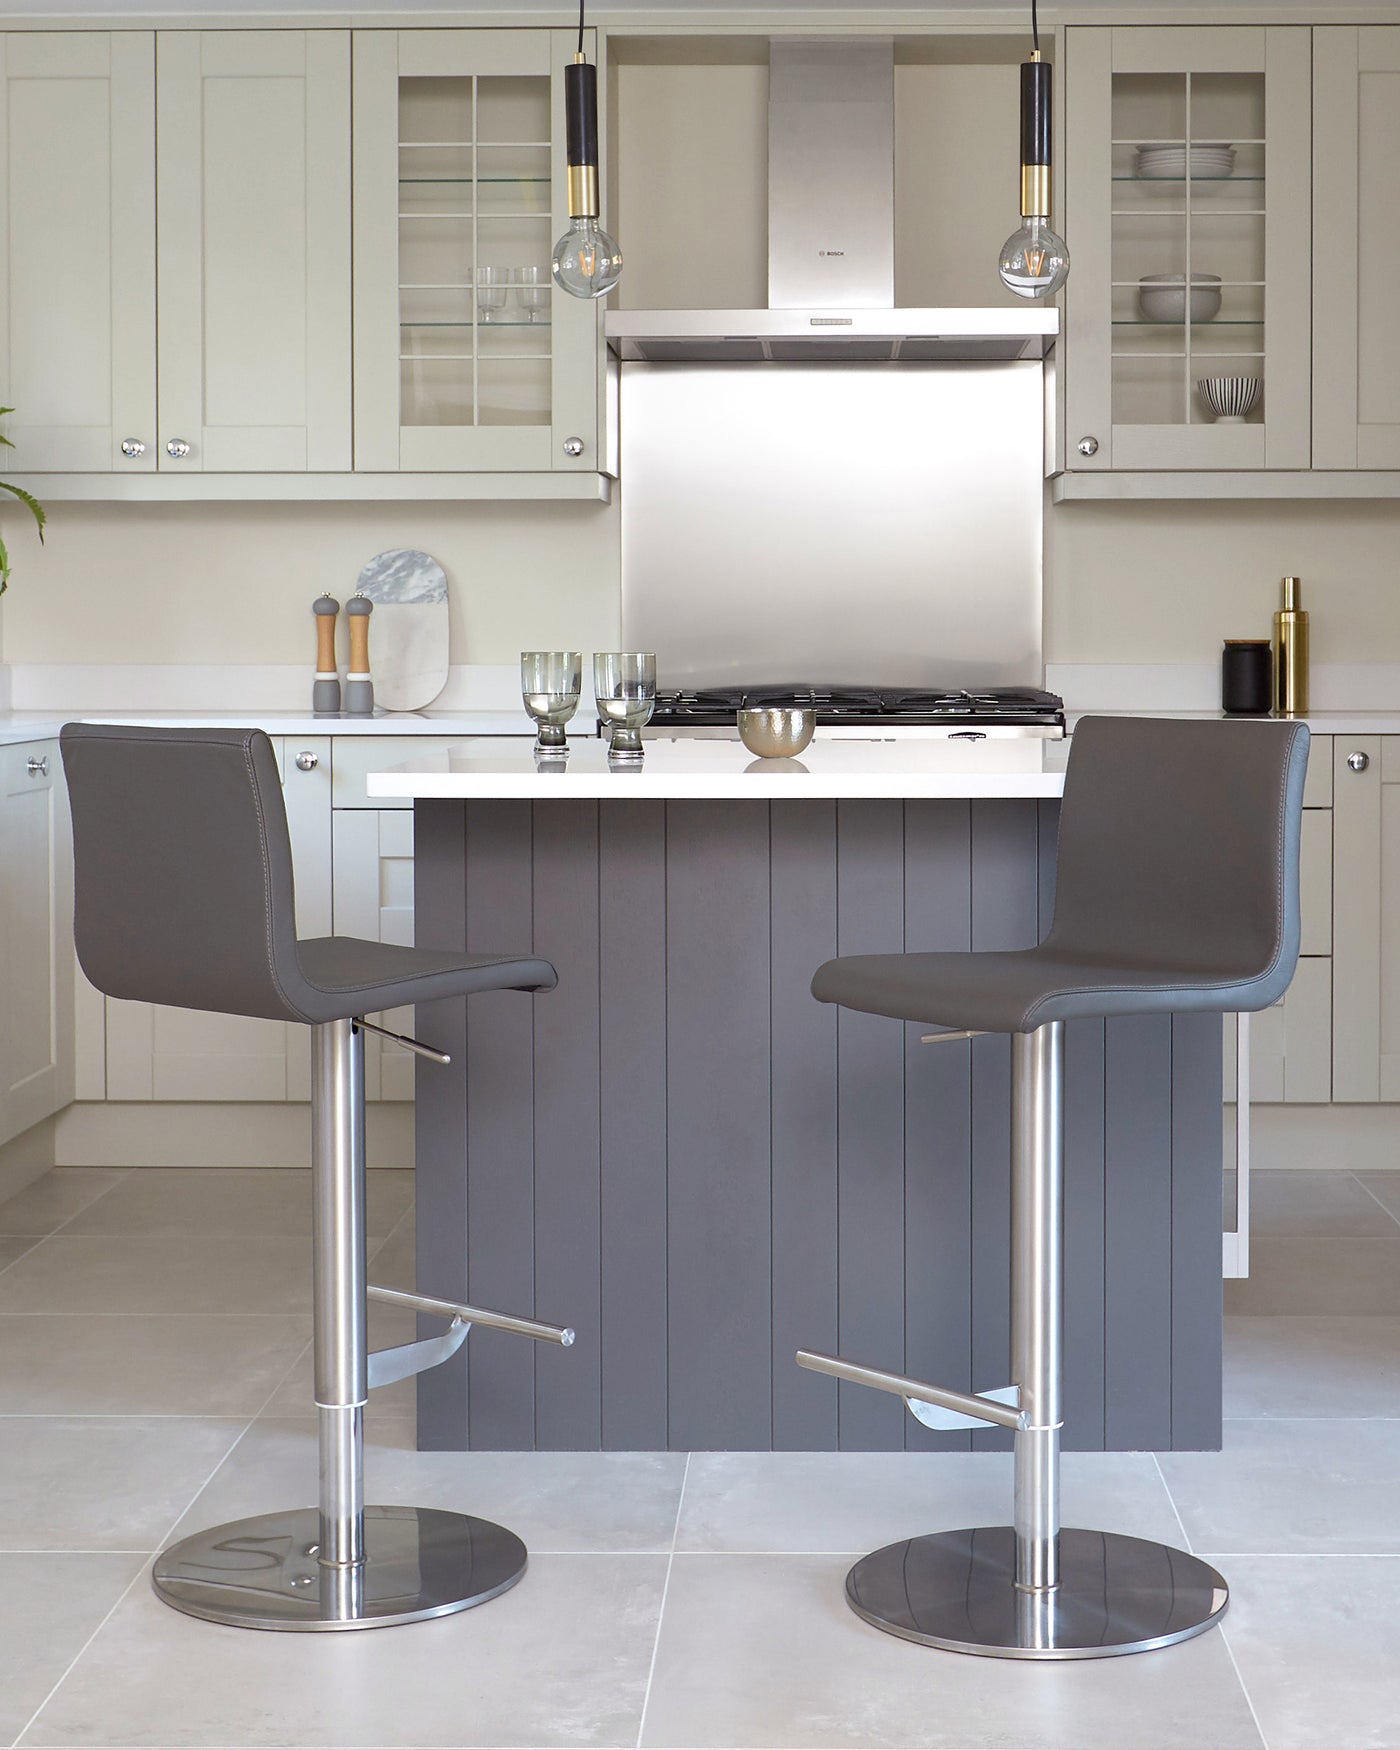 Two modern adjustable-height bar stools with footrests, featuring sleek grey upholstery and chrome bases, situated in a contemporary kitchen setting.